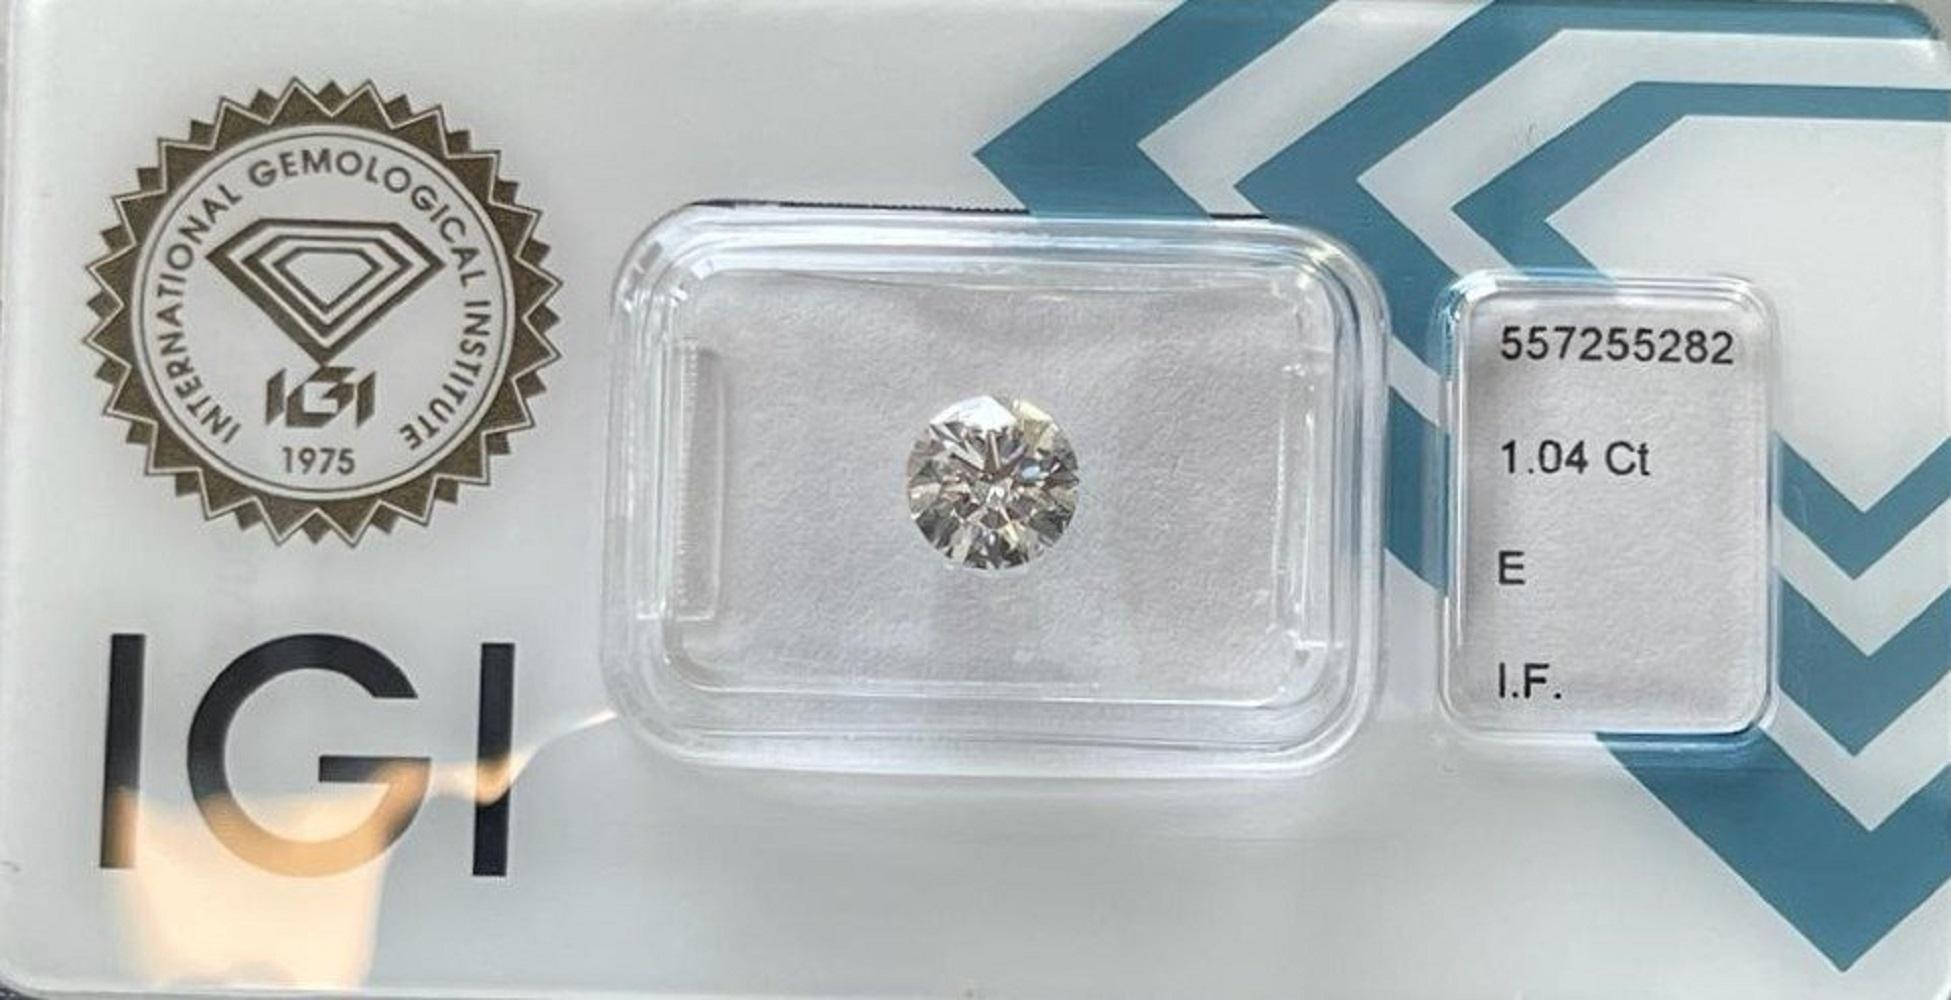 Dazzling 1pc Natural Diamond with 1.04 ct Round E IF IGI Certificate For Sale 2